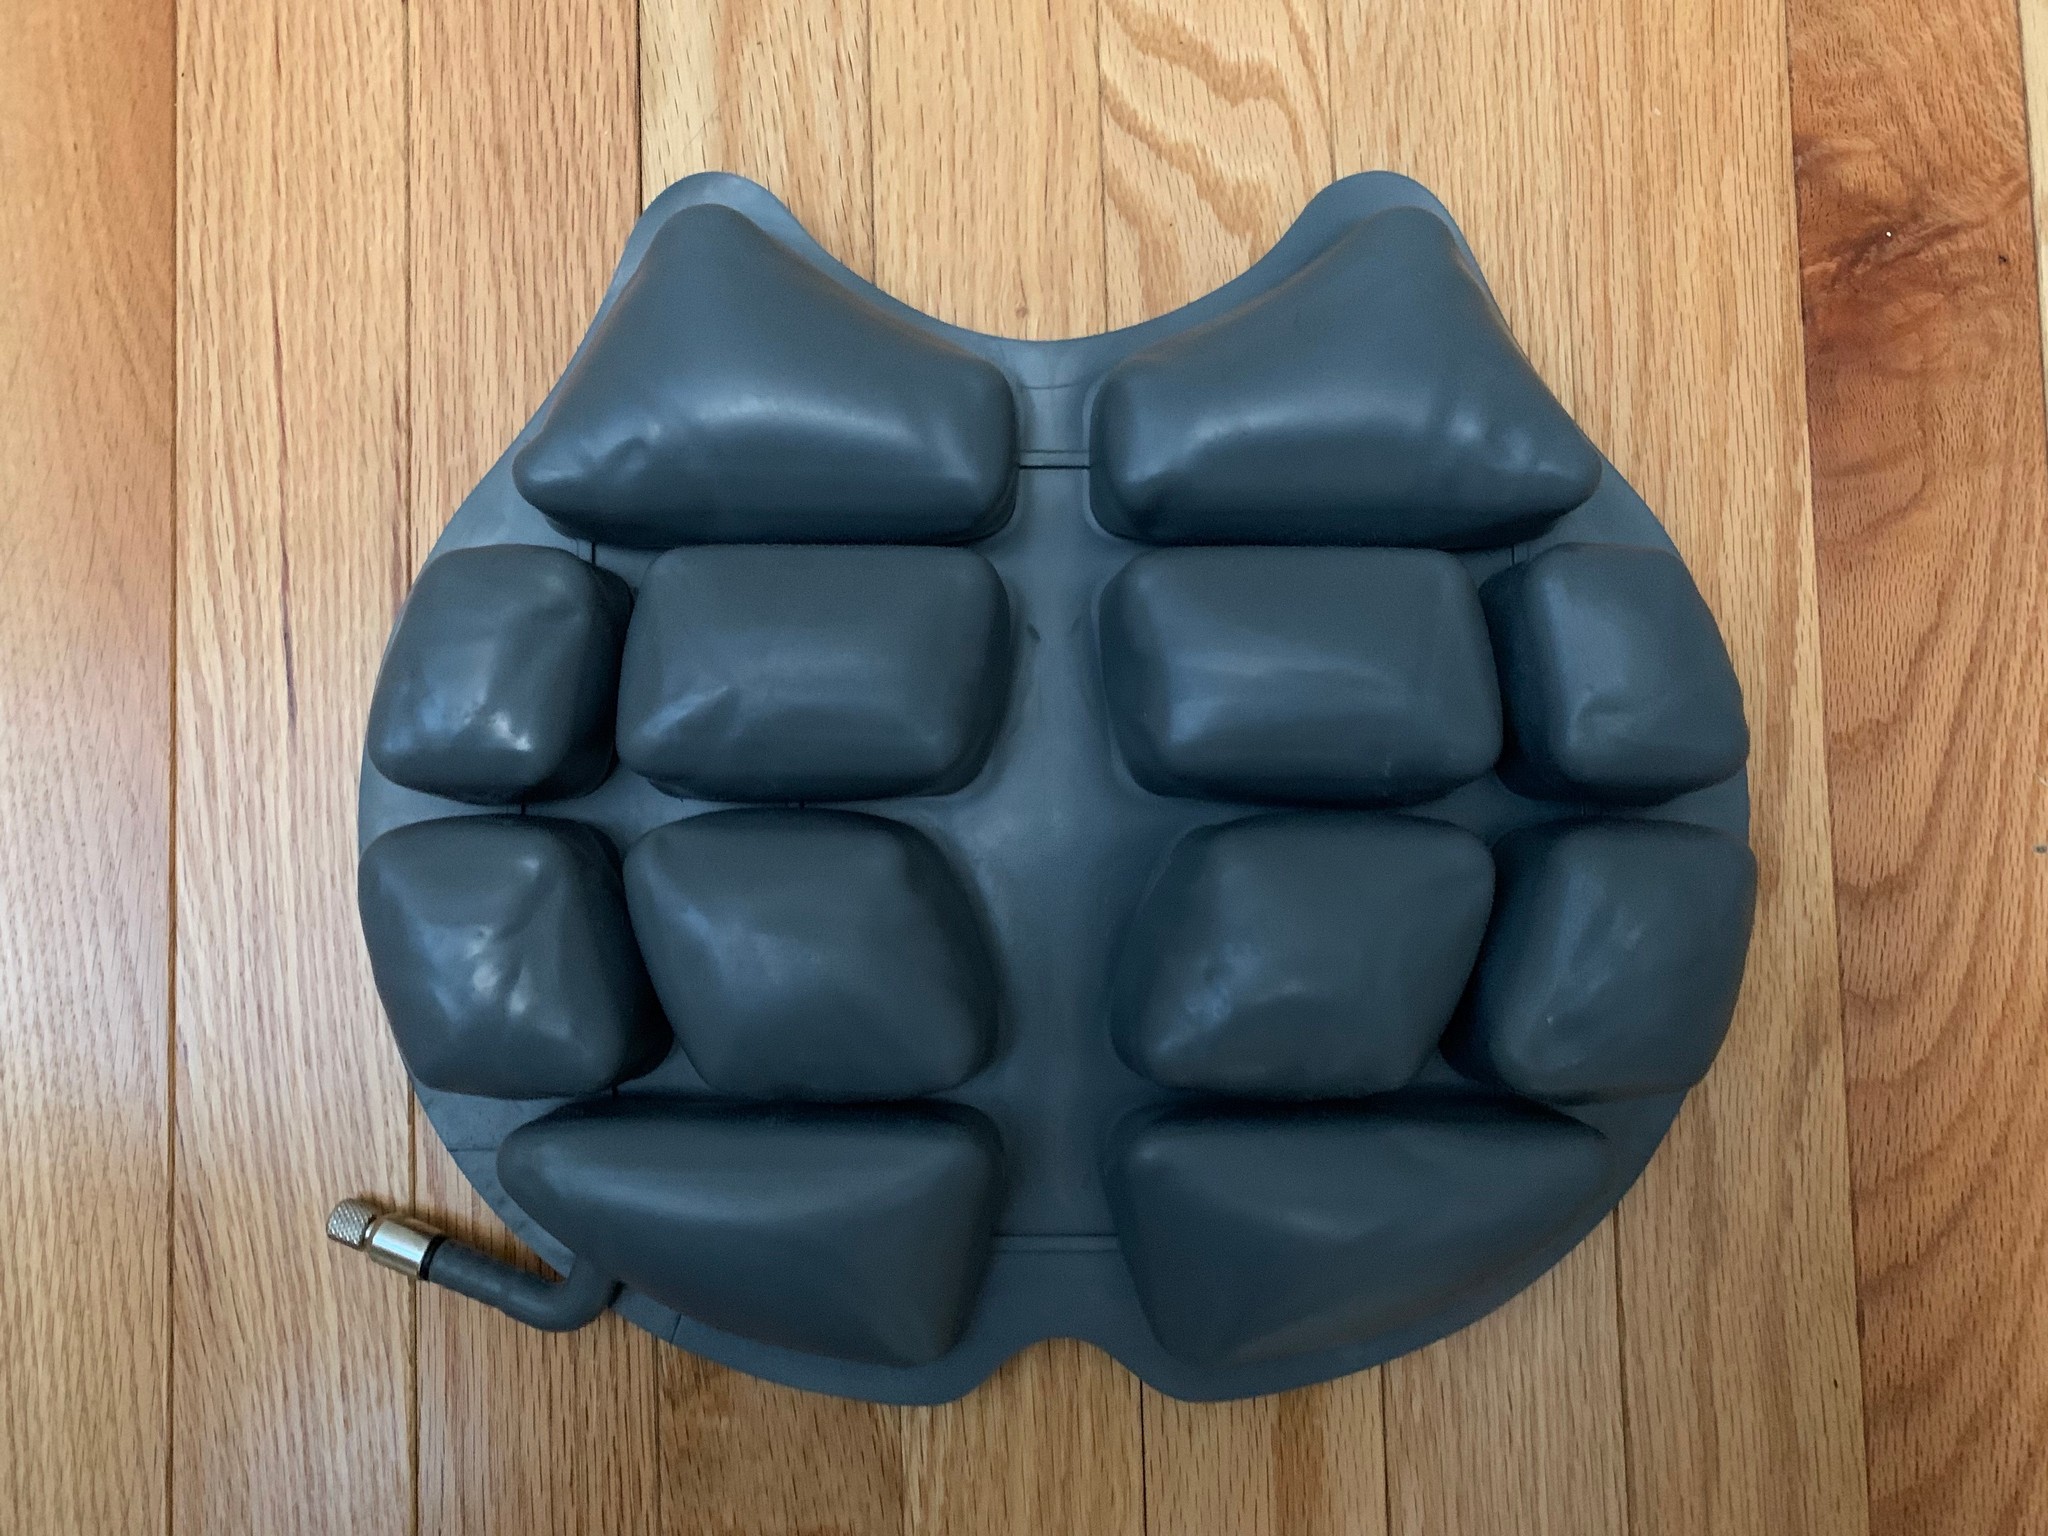 Wild Ass Seat Cushion Review